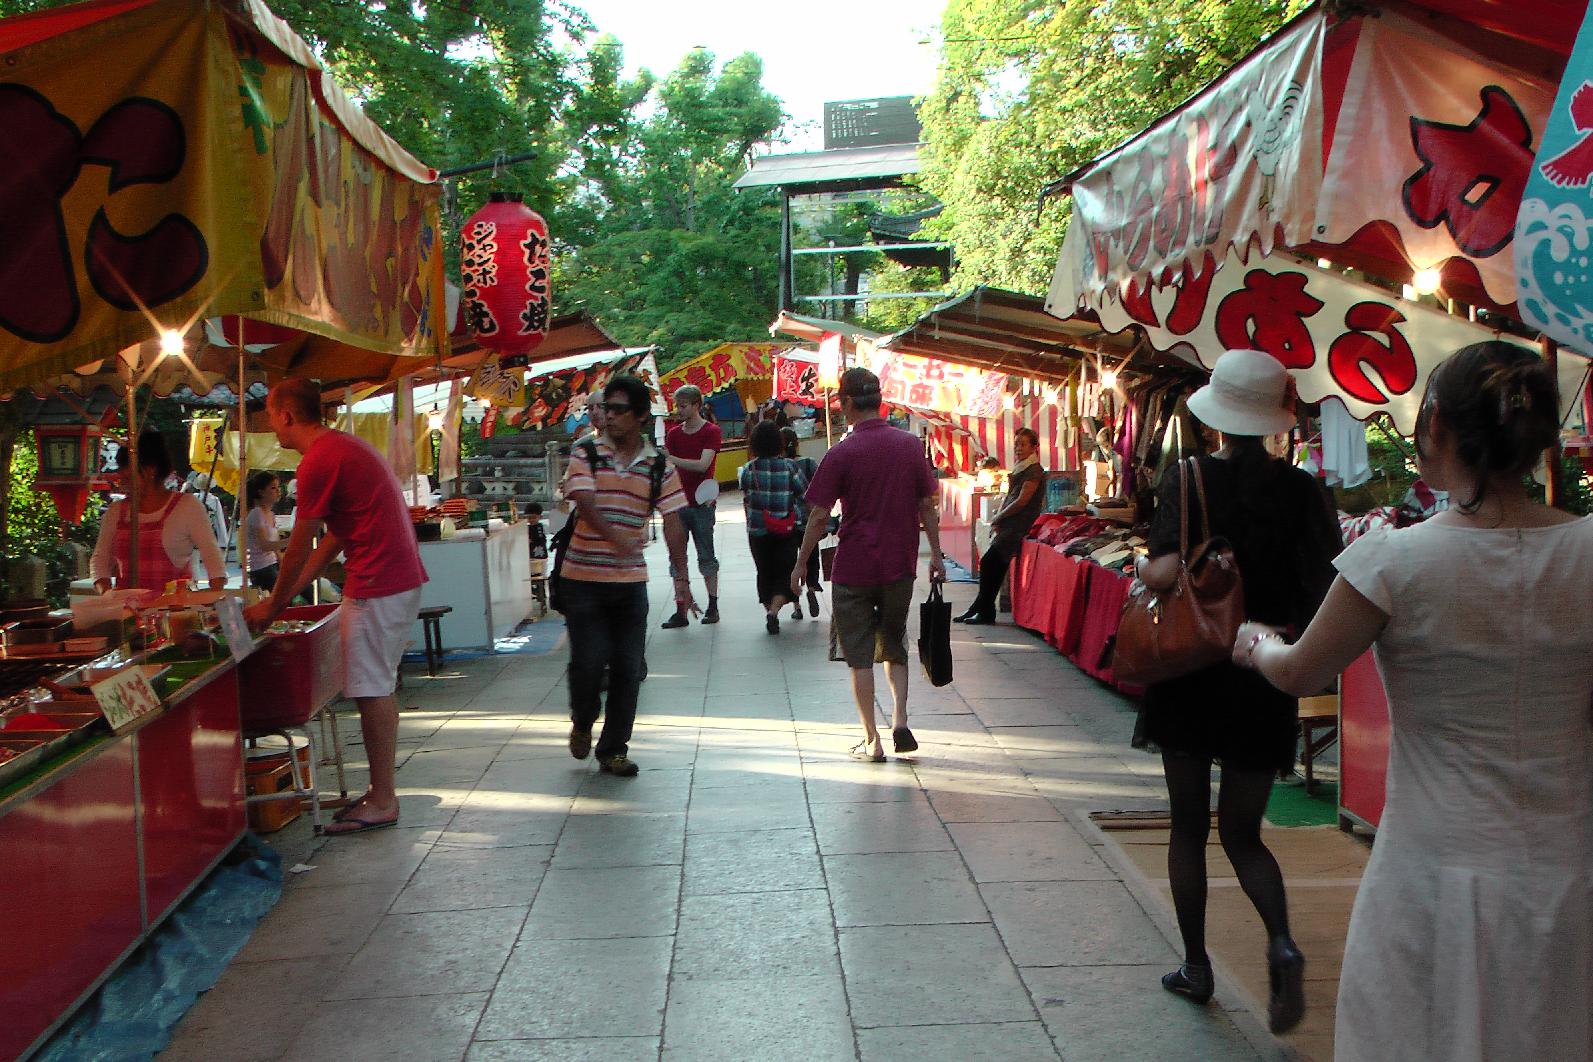 Souvenier and food booths in the Yasaka Shrine temple complex